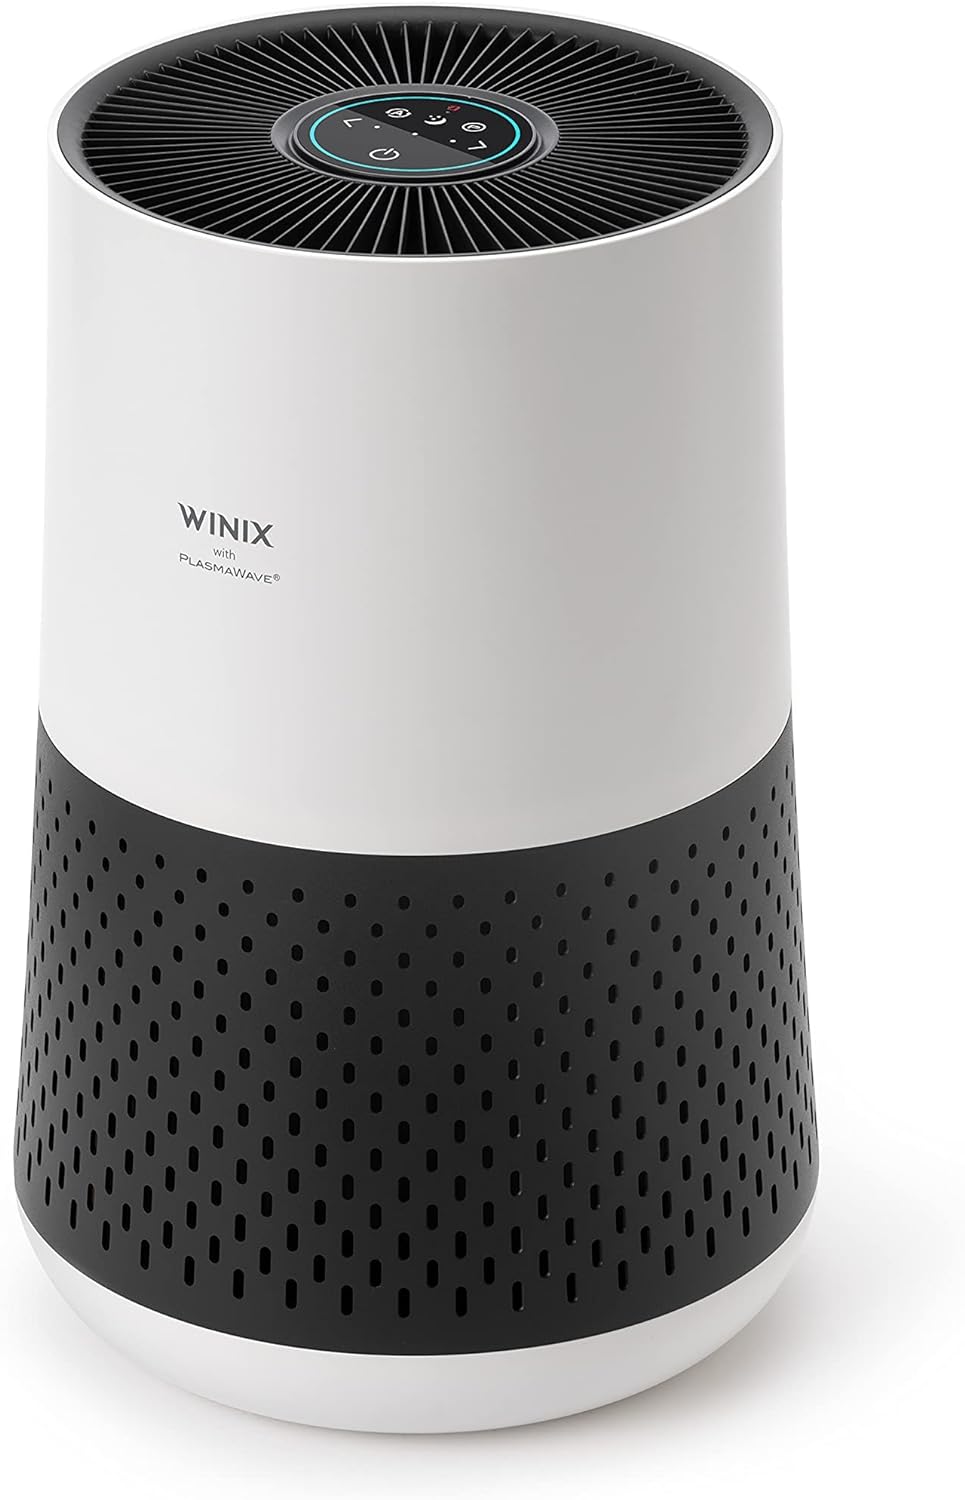 WINIX ZERO Compact Air Purifier with 4 Stage Filtration, Air Cleaner that Captures Pollen, Smoke and Fine Dust, Suitable for Rooms up to 50 m² - Amazing Gadgets Outlet